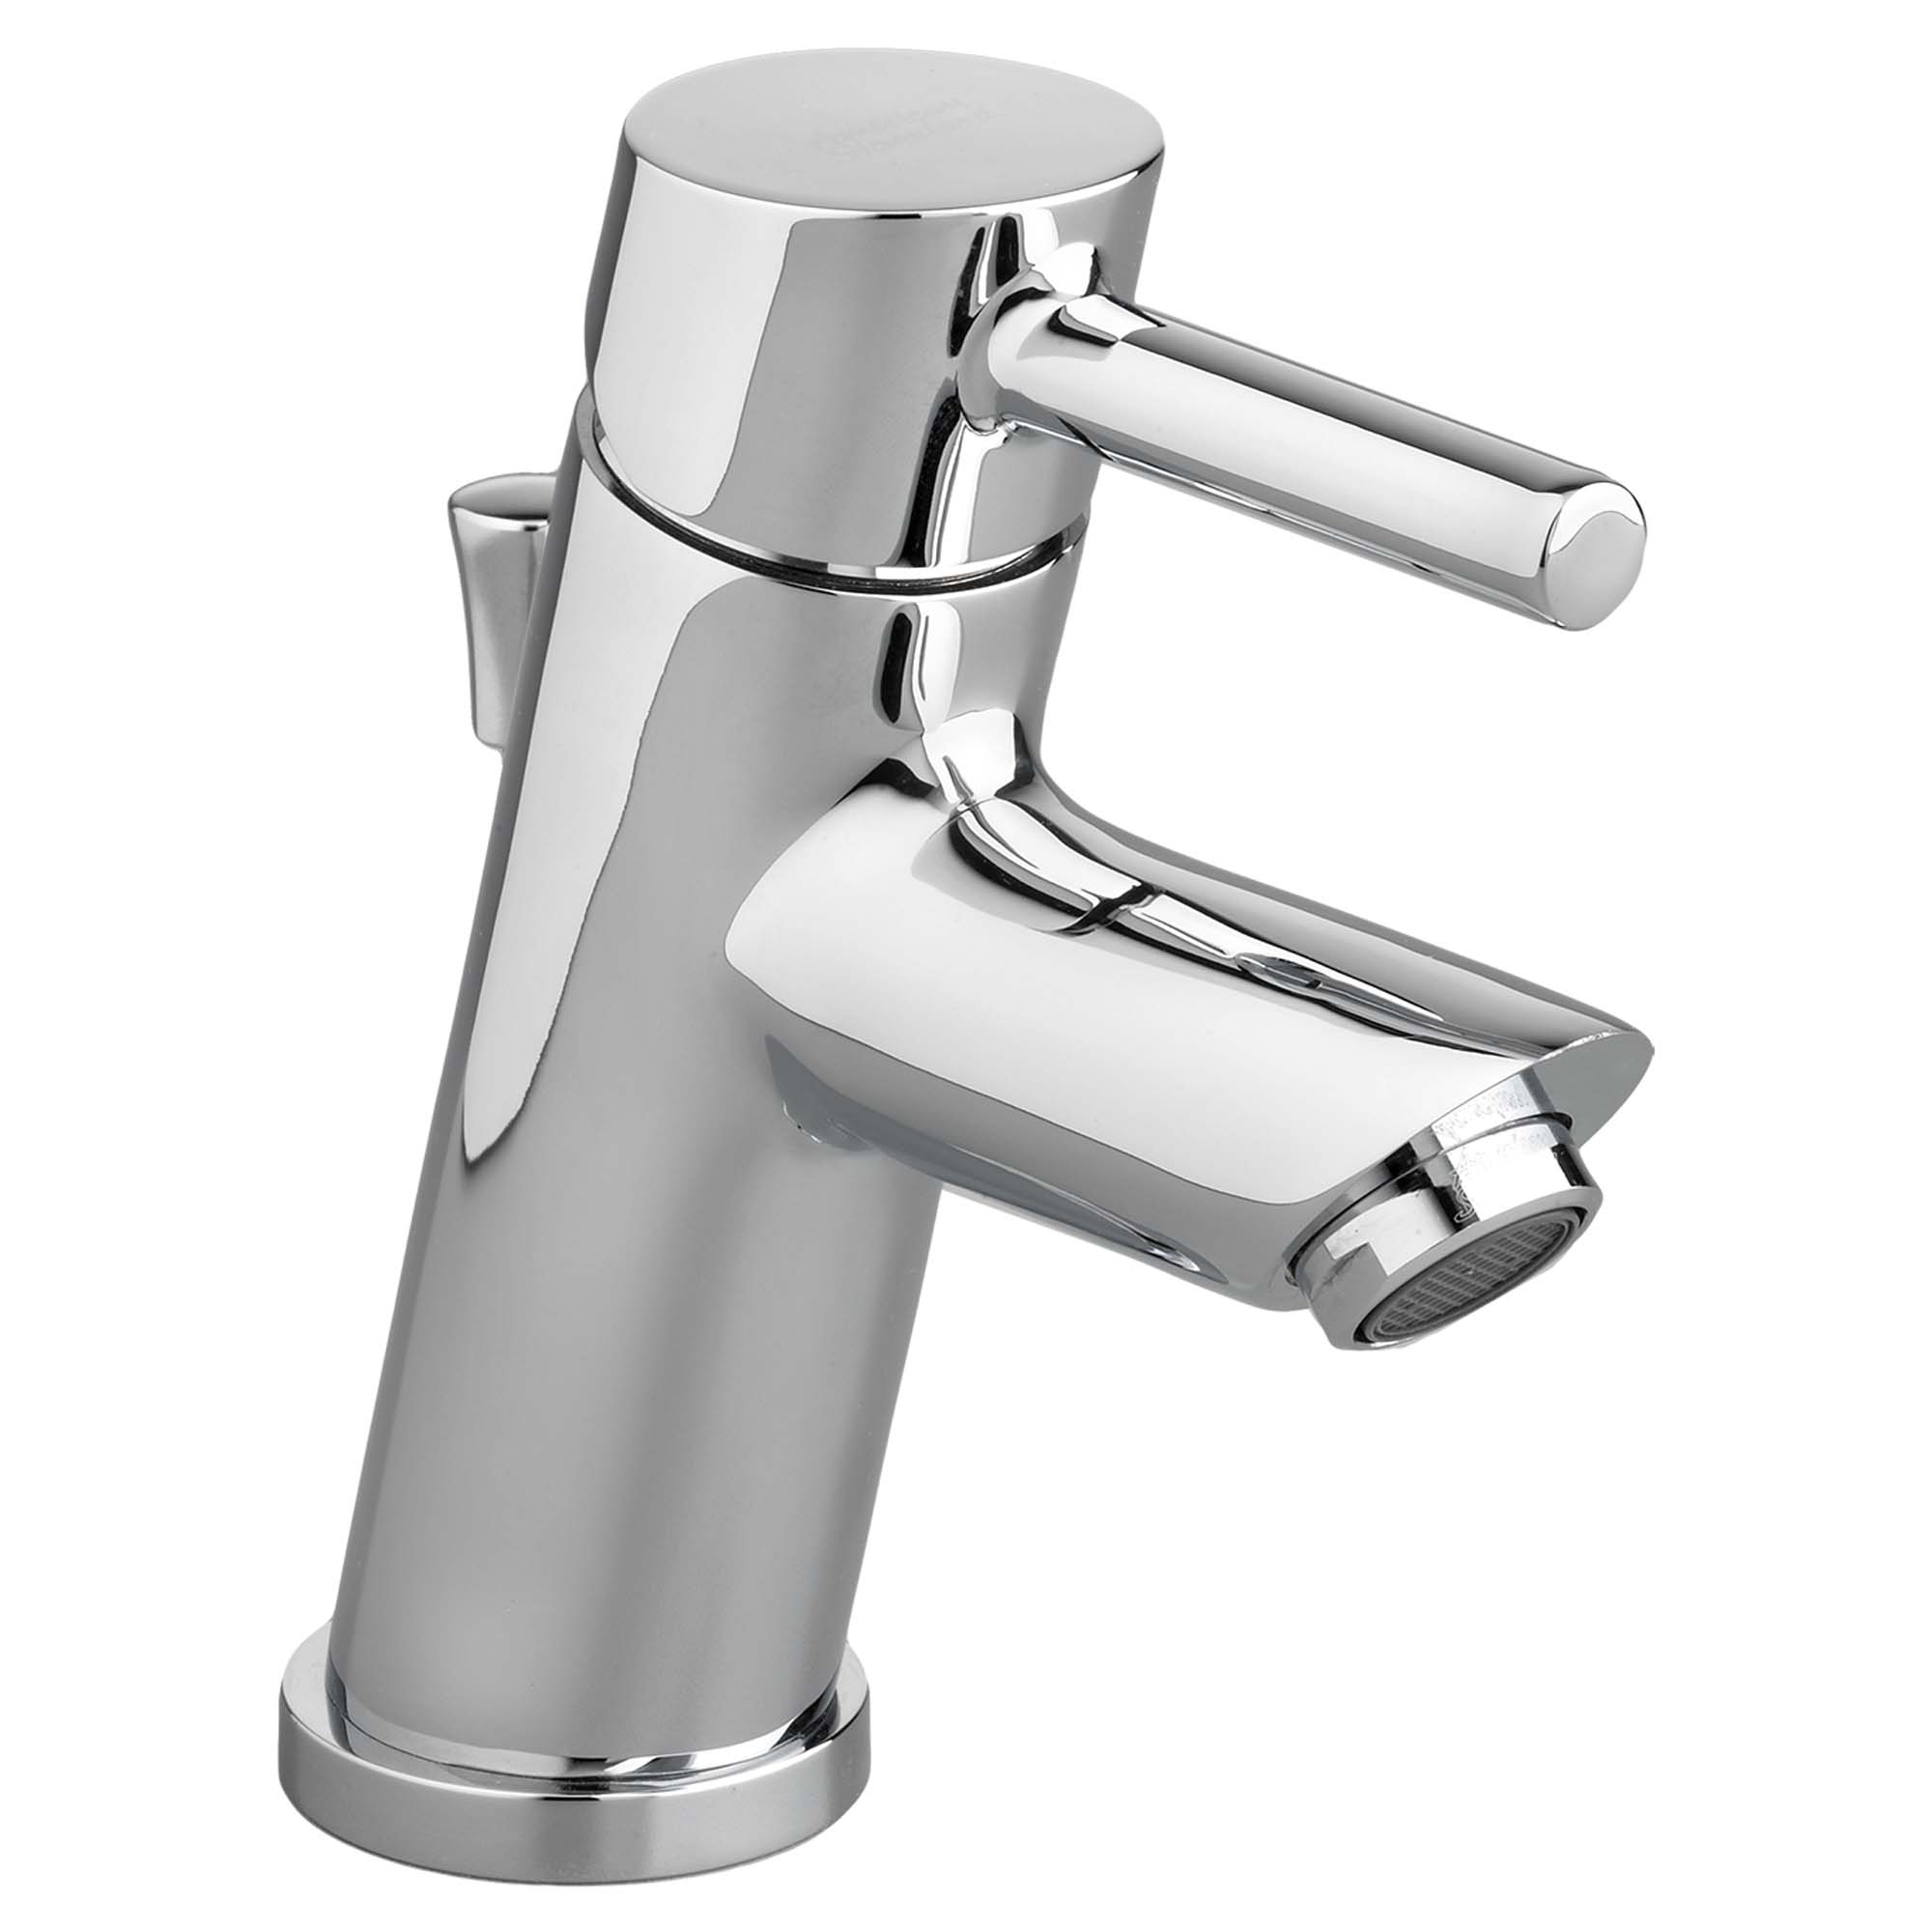 Serin™ Single Hole Single-Handle Bathroom Faucet 1.2 gpm/4.5 L/min With Lever Handle